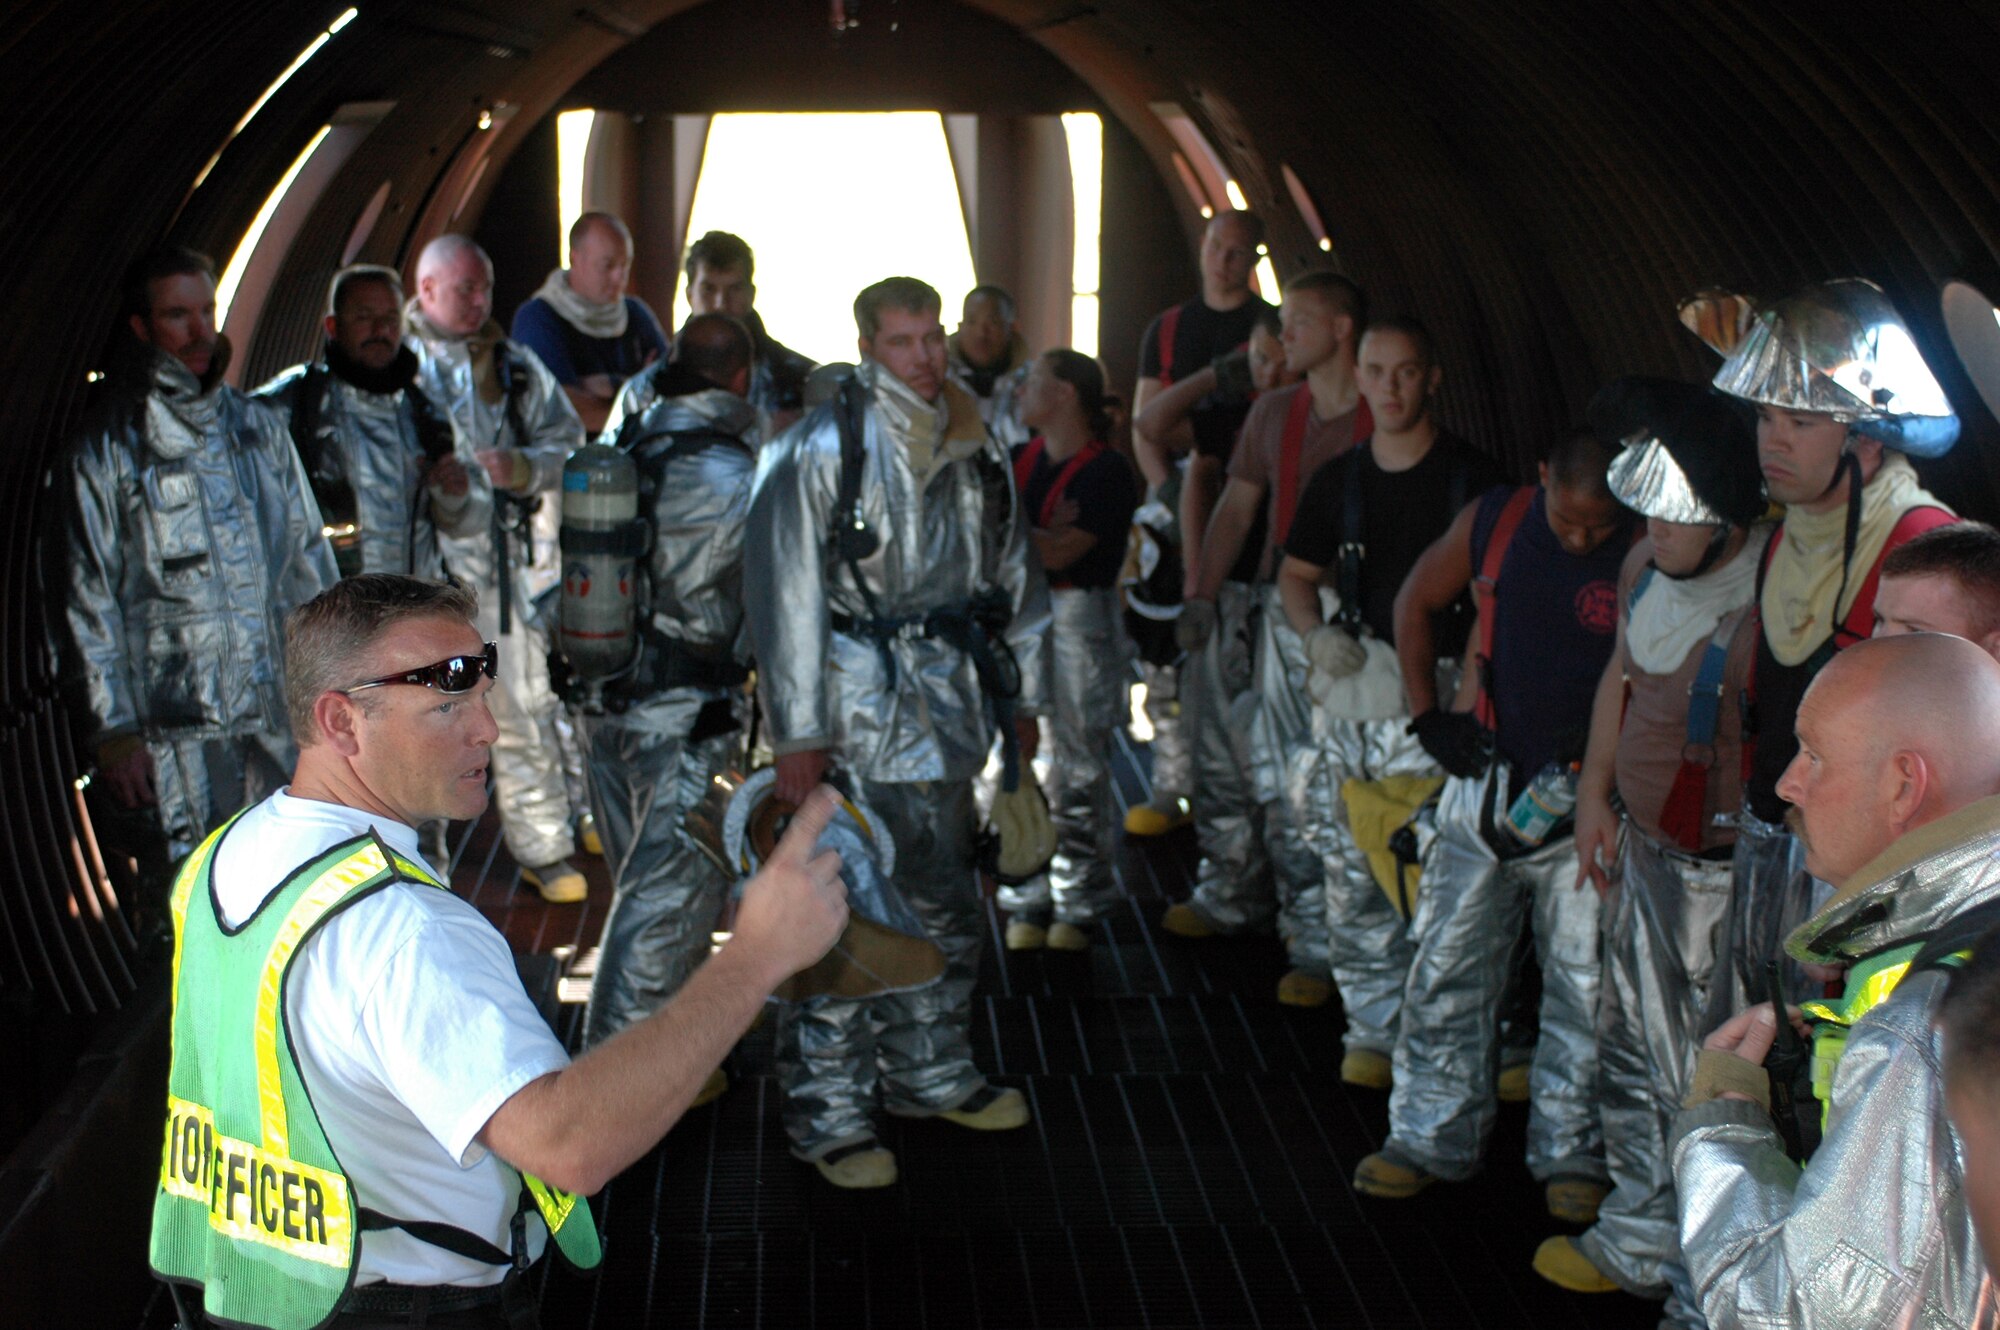 Donald Richert, assistant fire chief, briefs training procedures and safety precautions inside the aircraft mock-up before firefighters begin the training. Travis firefighters train on the mock-up quarterly and the NASA Ames Research Center firefighters train at least once a year. (U.S. Air Force photo/Staff Sgt. Matthew McGovern)